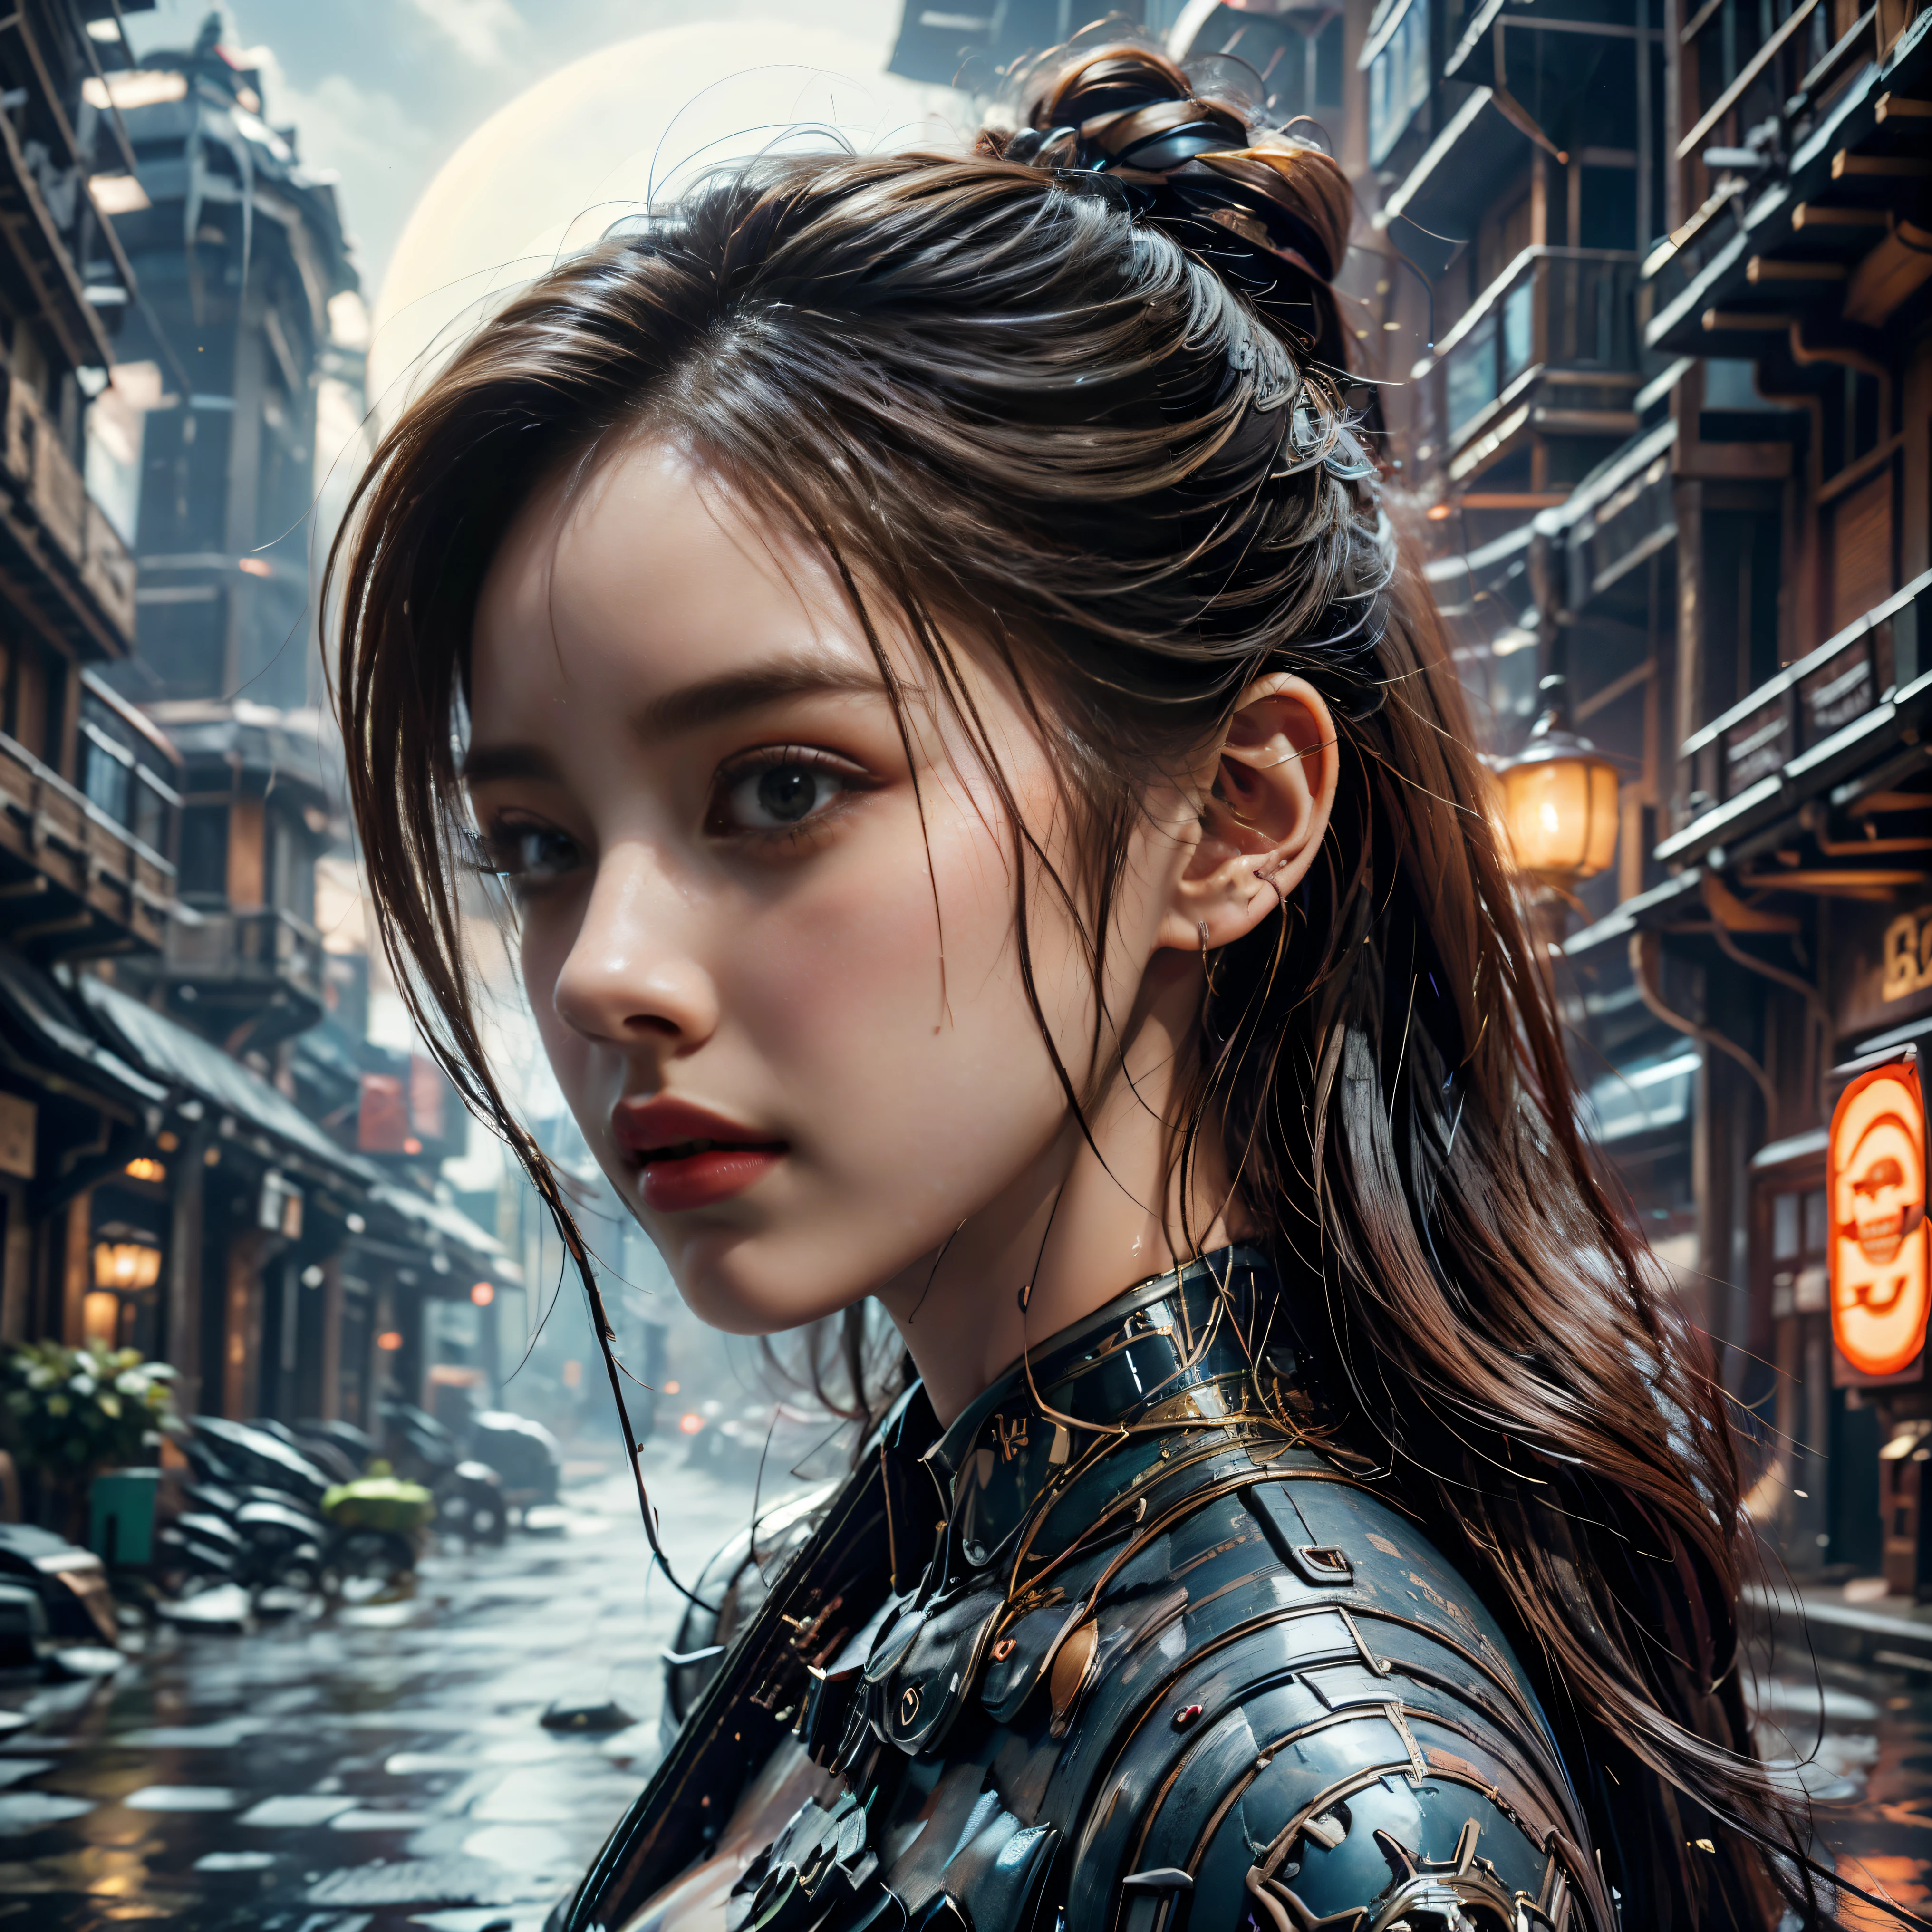 (highest quality、4K、8k、High resolution、masterpiece: 1.2)、Very detailed、(Genuine、Realistic、Realistic: 1.37)、photograph、(Front and side close-up of face:1.7)、((Young and very beautiful woman))、The woman is wearing protective clothing、(Ride a motorcycle and race)、(Leaning the motorcycle into a corner)、(Flowing hair and flowing clothes、background、Motion Blur Effect:1.37)、spark、Incandescent bulb、Neon color、Future City、Vibrant Street、Light reflections on wet sidewalk、Skyscraper、Sculptural architecture、Holographic Signage、Stylish and sophisticated design、Blurred motion of speeding cars、energy and excitement in the air、(Windy atmosphere)、Moonlit cityscape、The motorcycle of the future、COMG3O、mecha